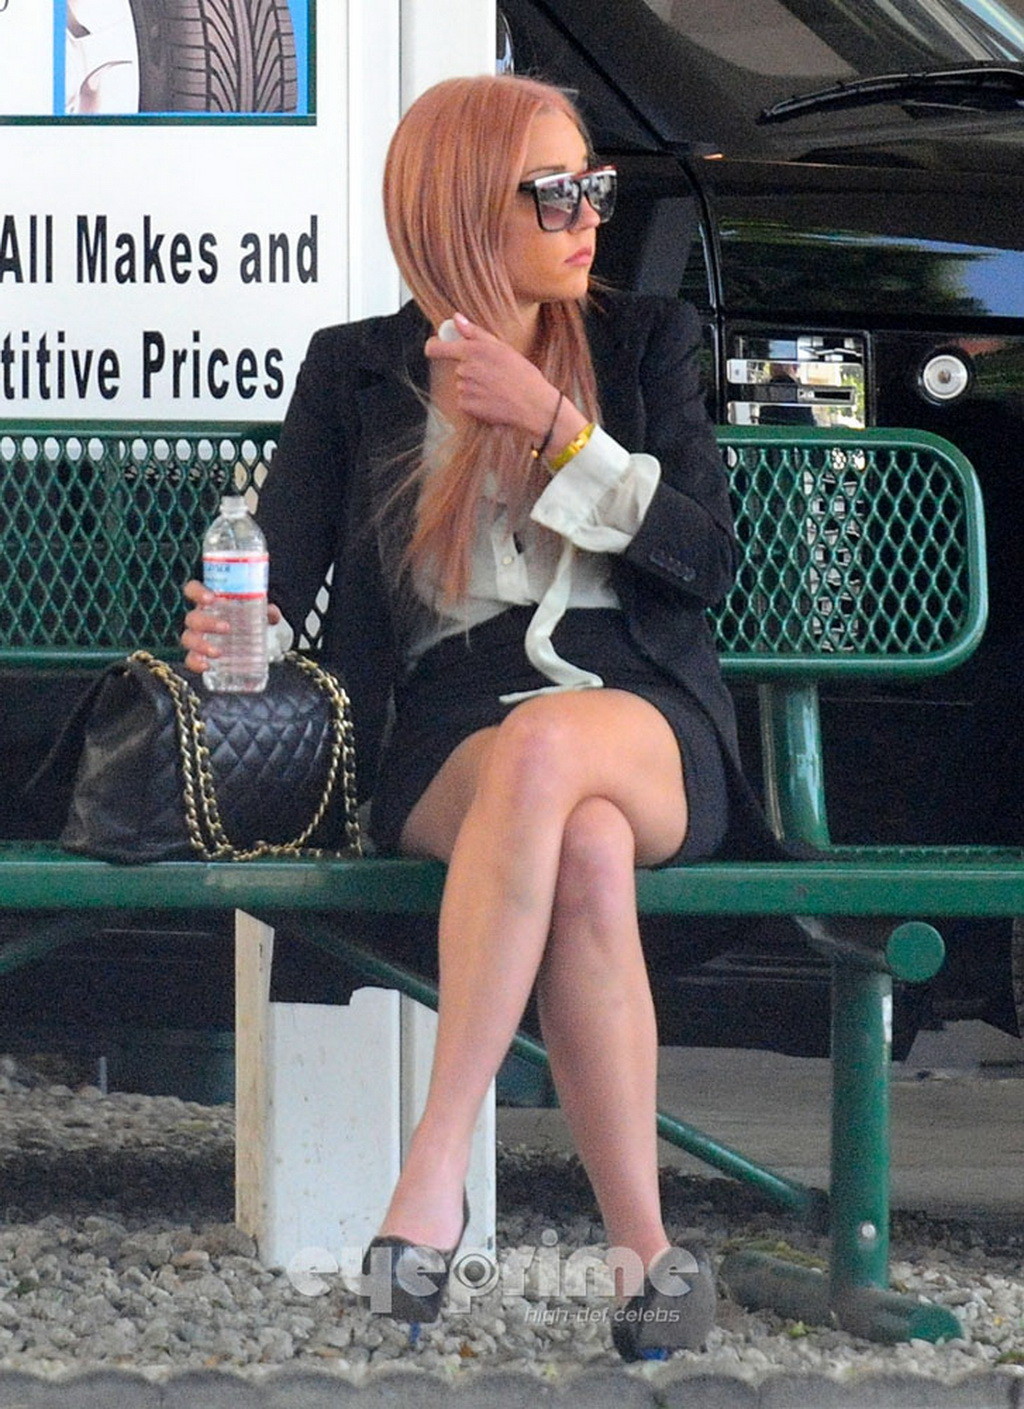 Amanda Bynes looking very sexy in short skirt and c-thru shirt at a tow yard in  #75267402